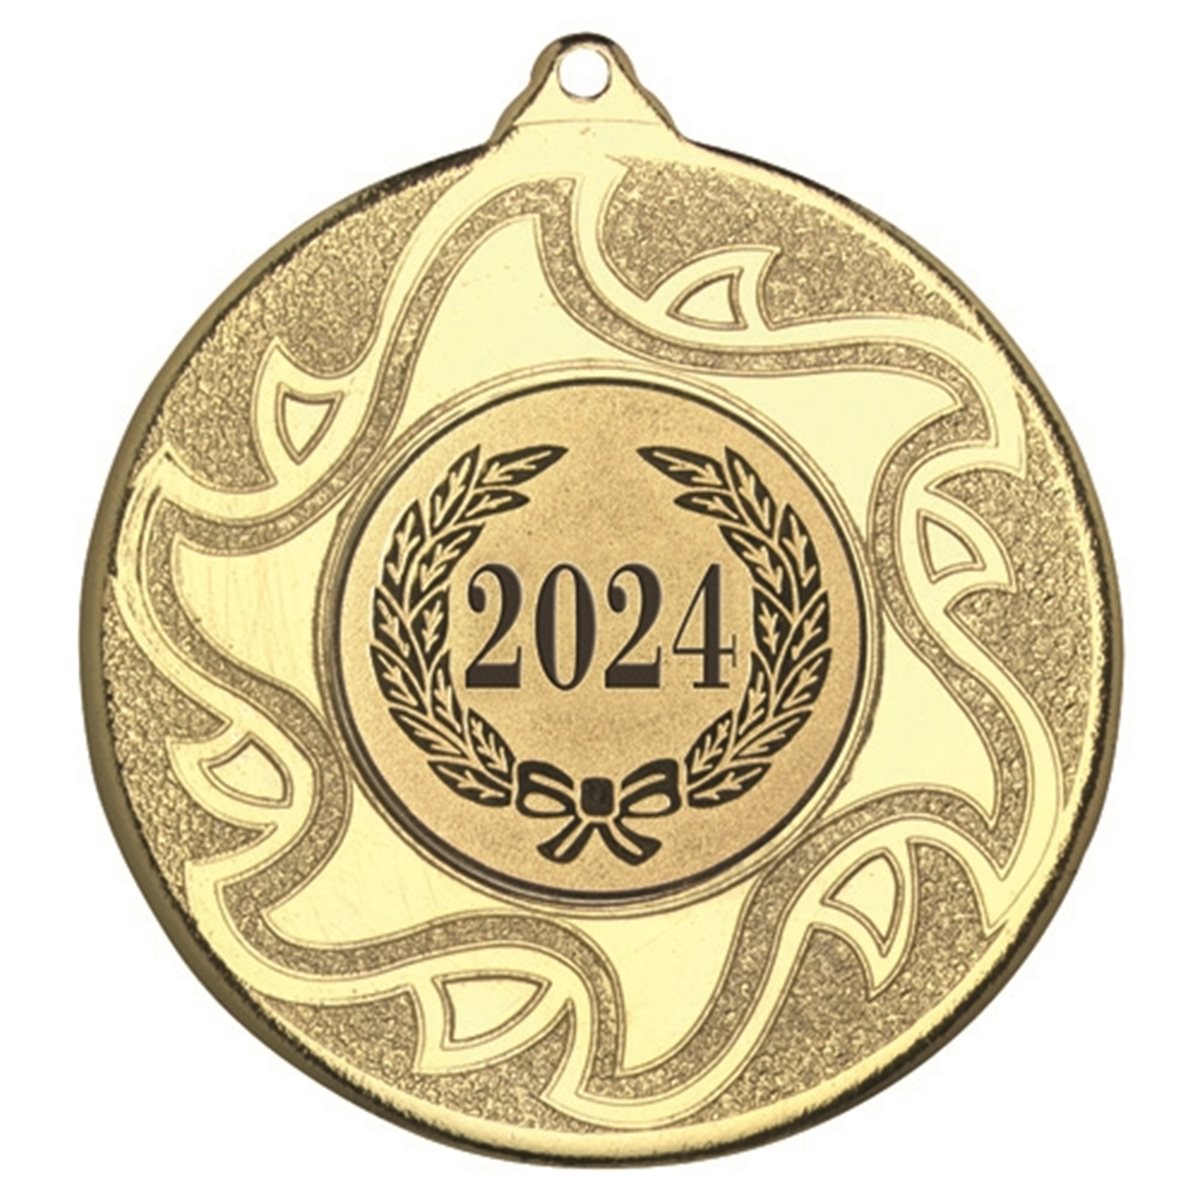 50mm 2024 Medal M13G in Gold, Silver and Bronze